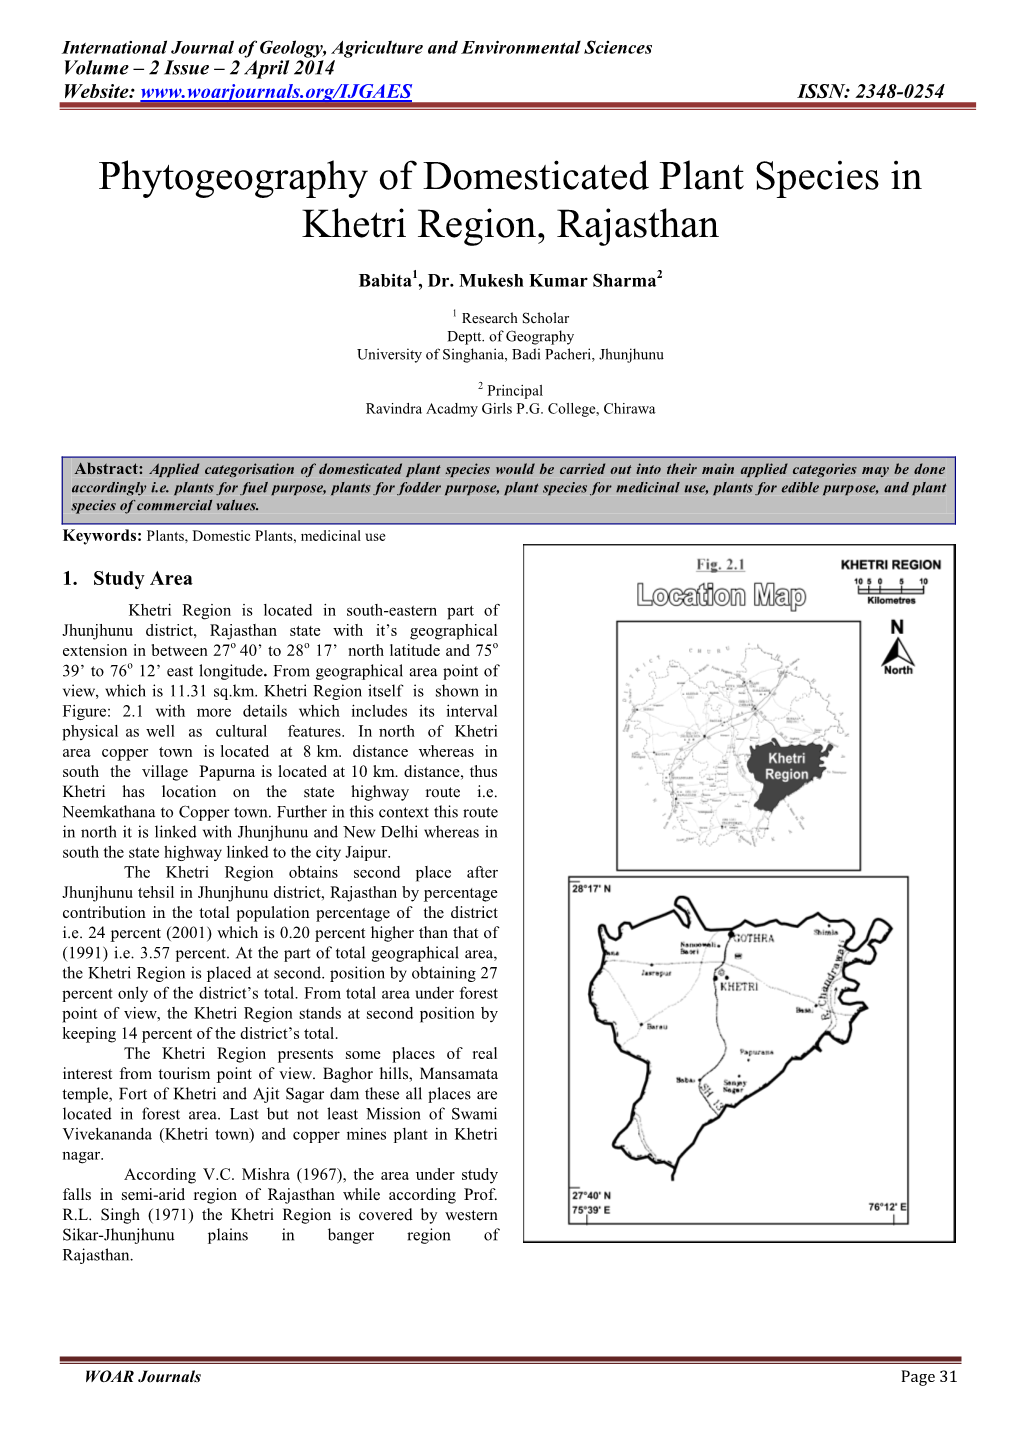 Phytogeography of Domesticated Plant Species in Khetri Region, Rajasthan